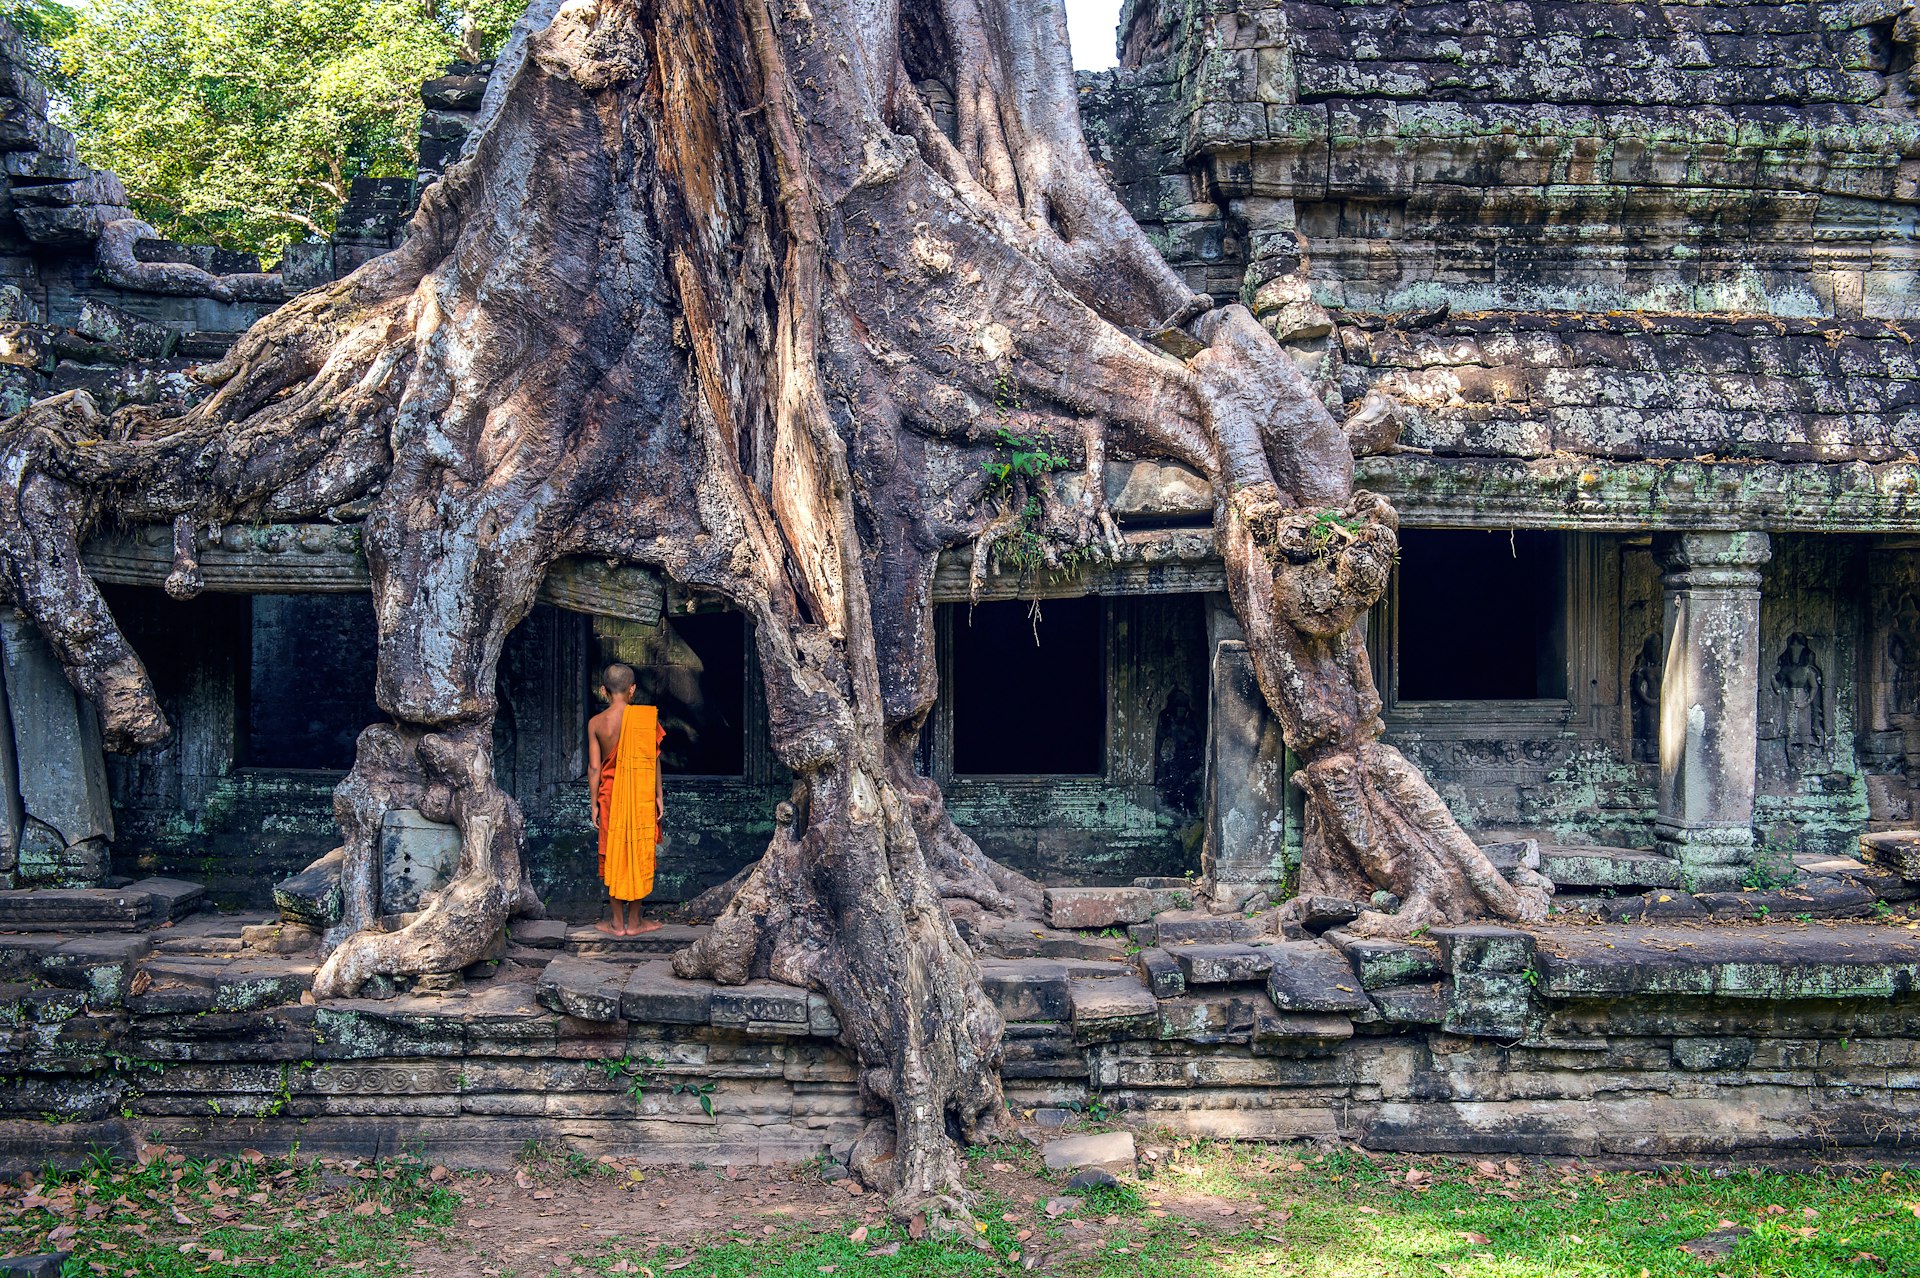 A monk wearing traditional orange robes stands among the large tree roots that cover temples of Ta Prohm